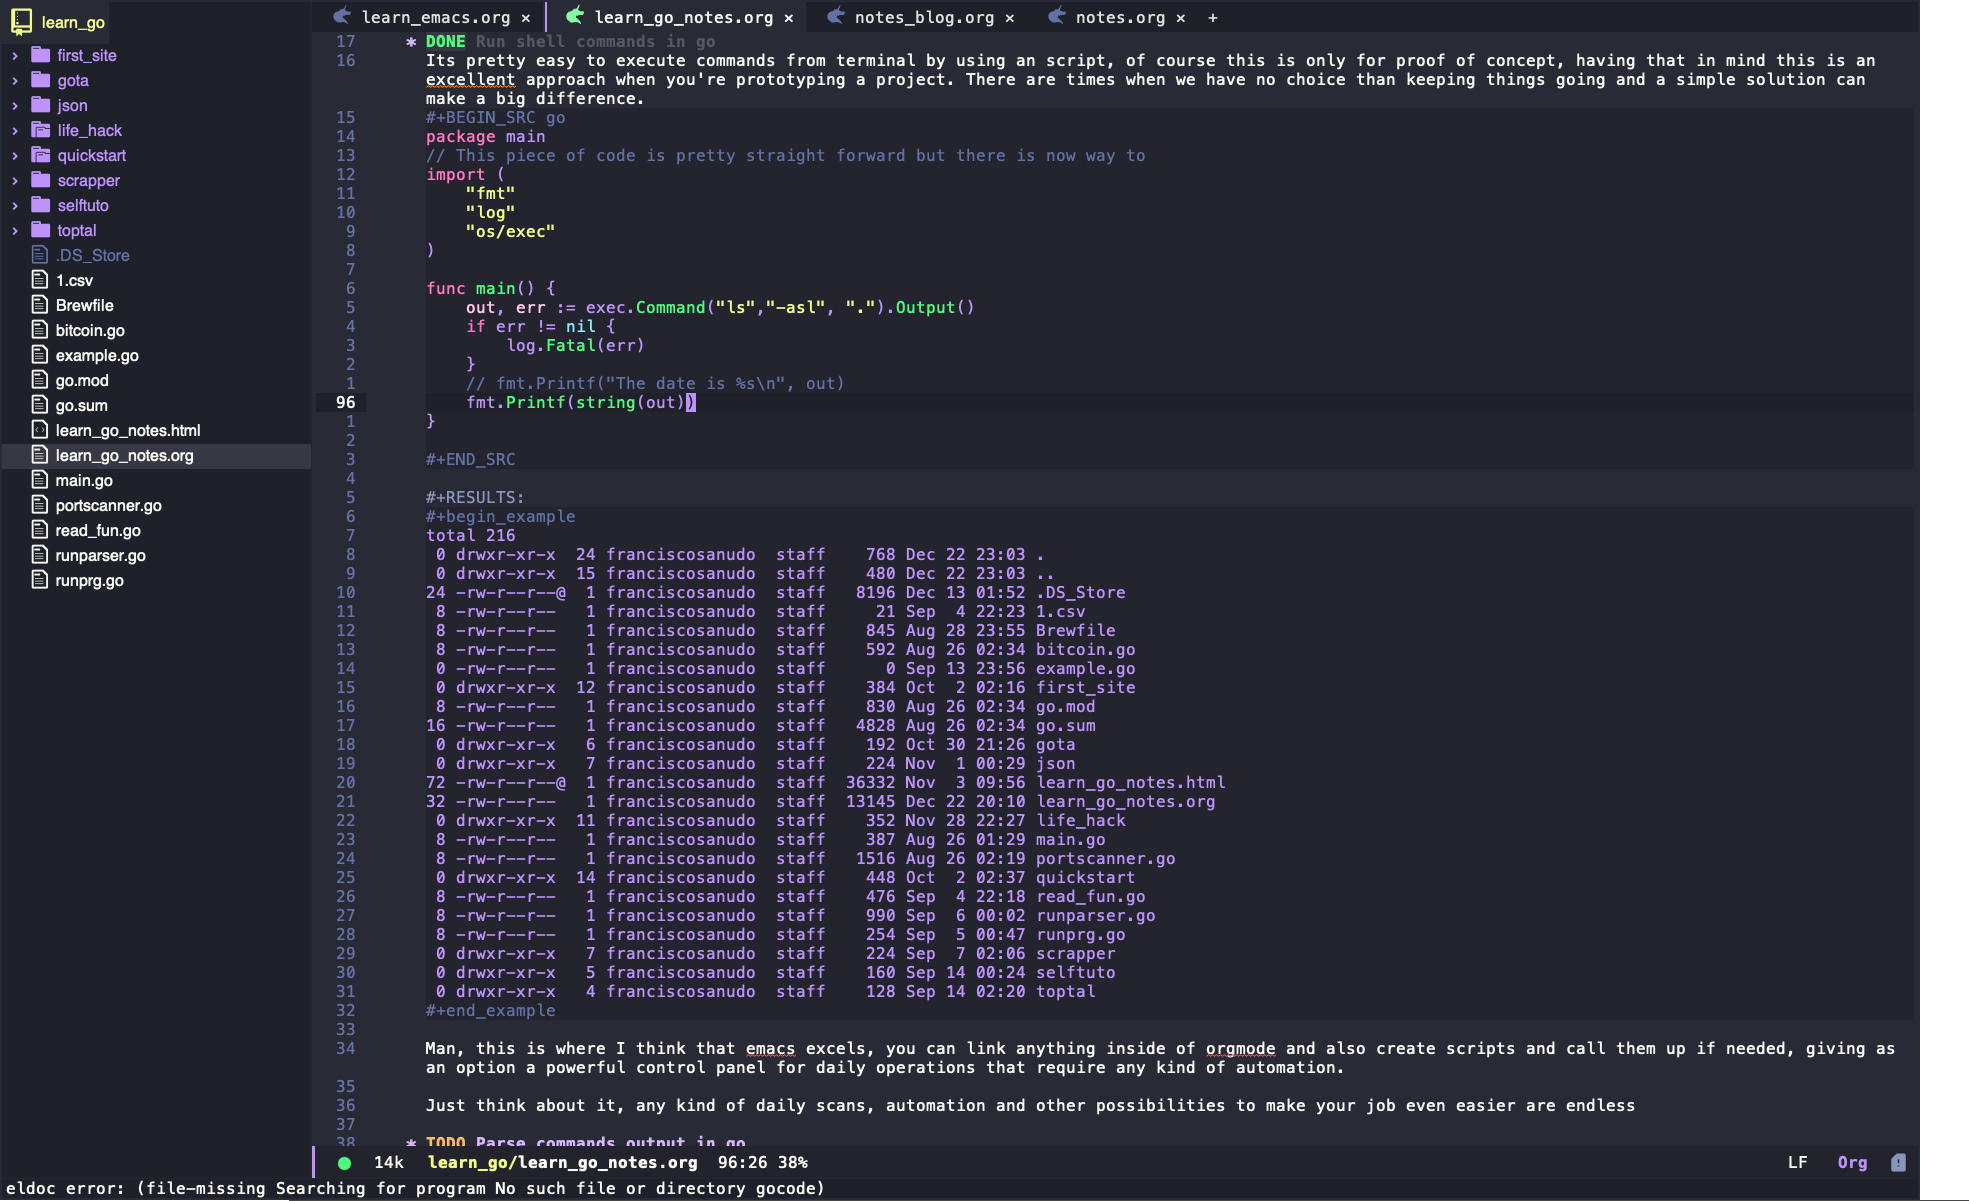 Code blocks are great inside of Emacs, you should try them